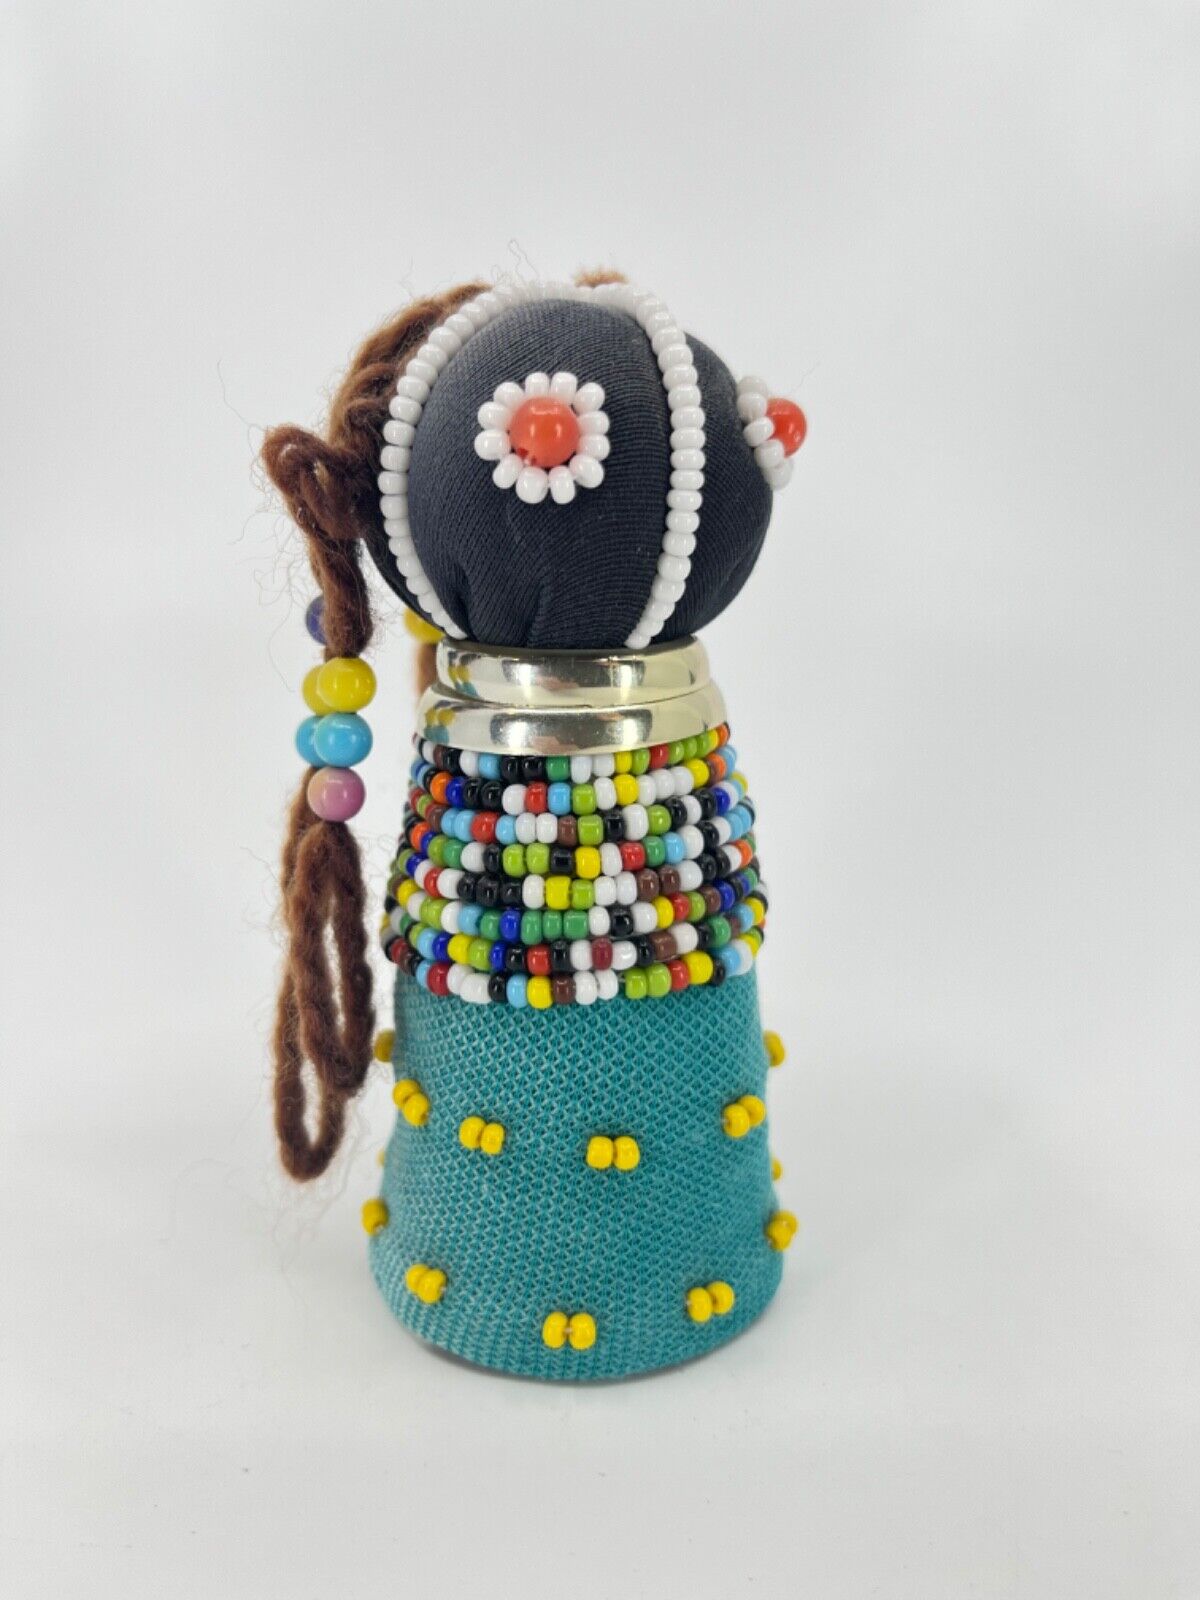 Vintage Ndebele South African Colorful Beaded Ceremonial Fertility Doll 4.5”